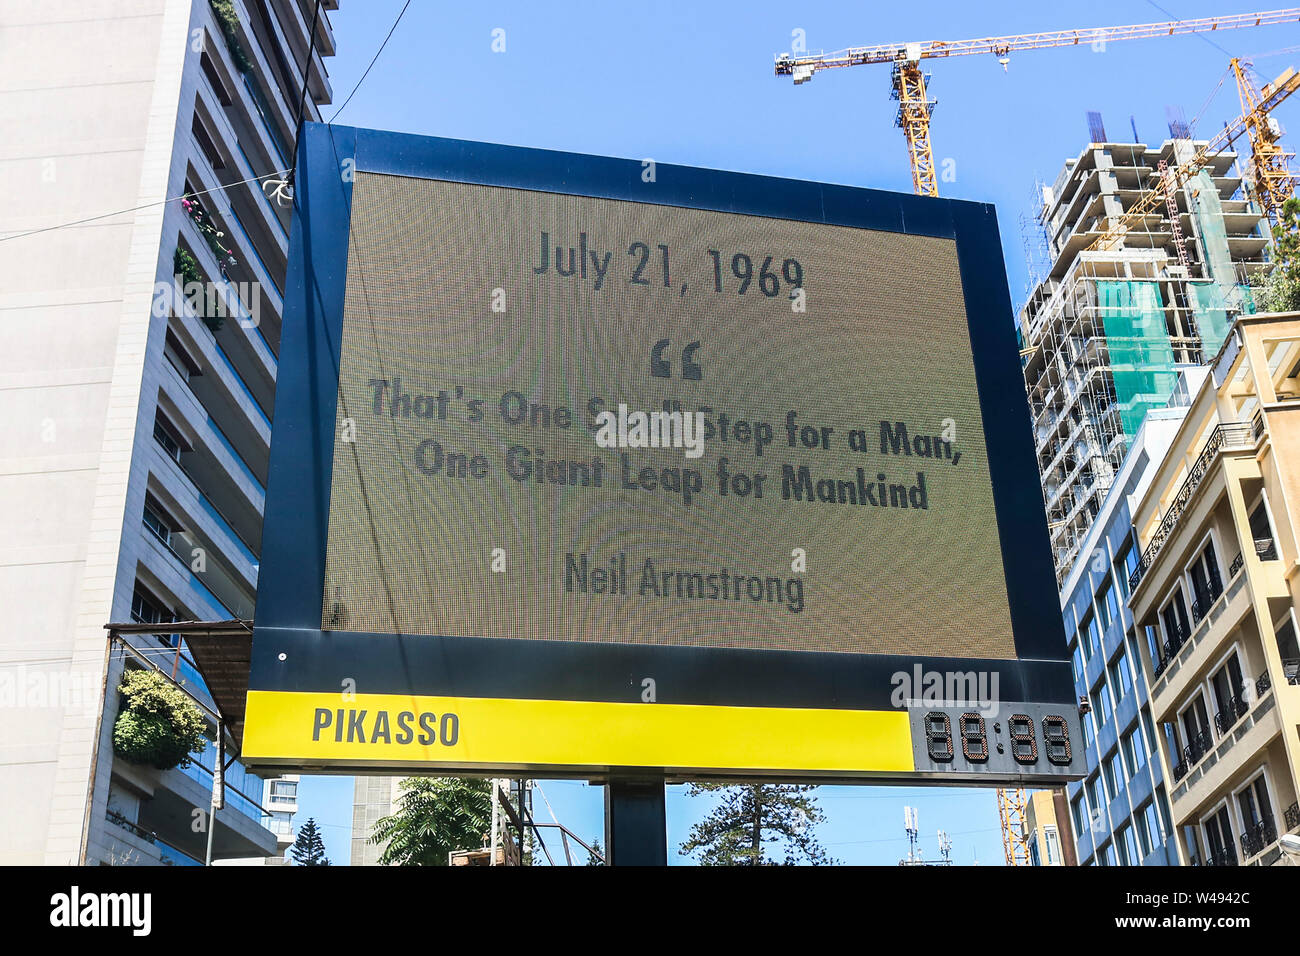 Beirut, Lebanon. 21st July 2019. A giant billboard in Beirut celebrates the 50th anniversary of the Apollo 11 landing on the moon surface on 21 July 1969  by American astronaunt Neil Armstrong who made the famous quote ' That's One Small Step for a Man, One Giant Leap for Mankind' as he stepped off his lunar module on the surface of the moon Credit: amer ghazzal/Alamy Live News Stock Photo